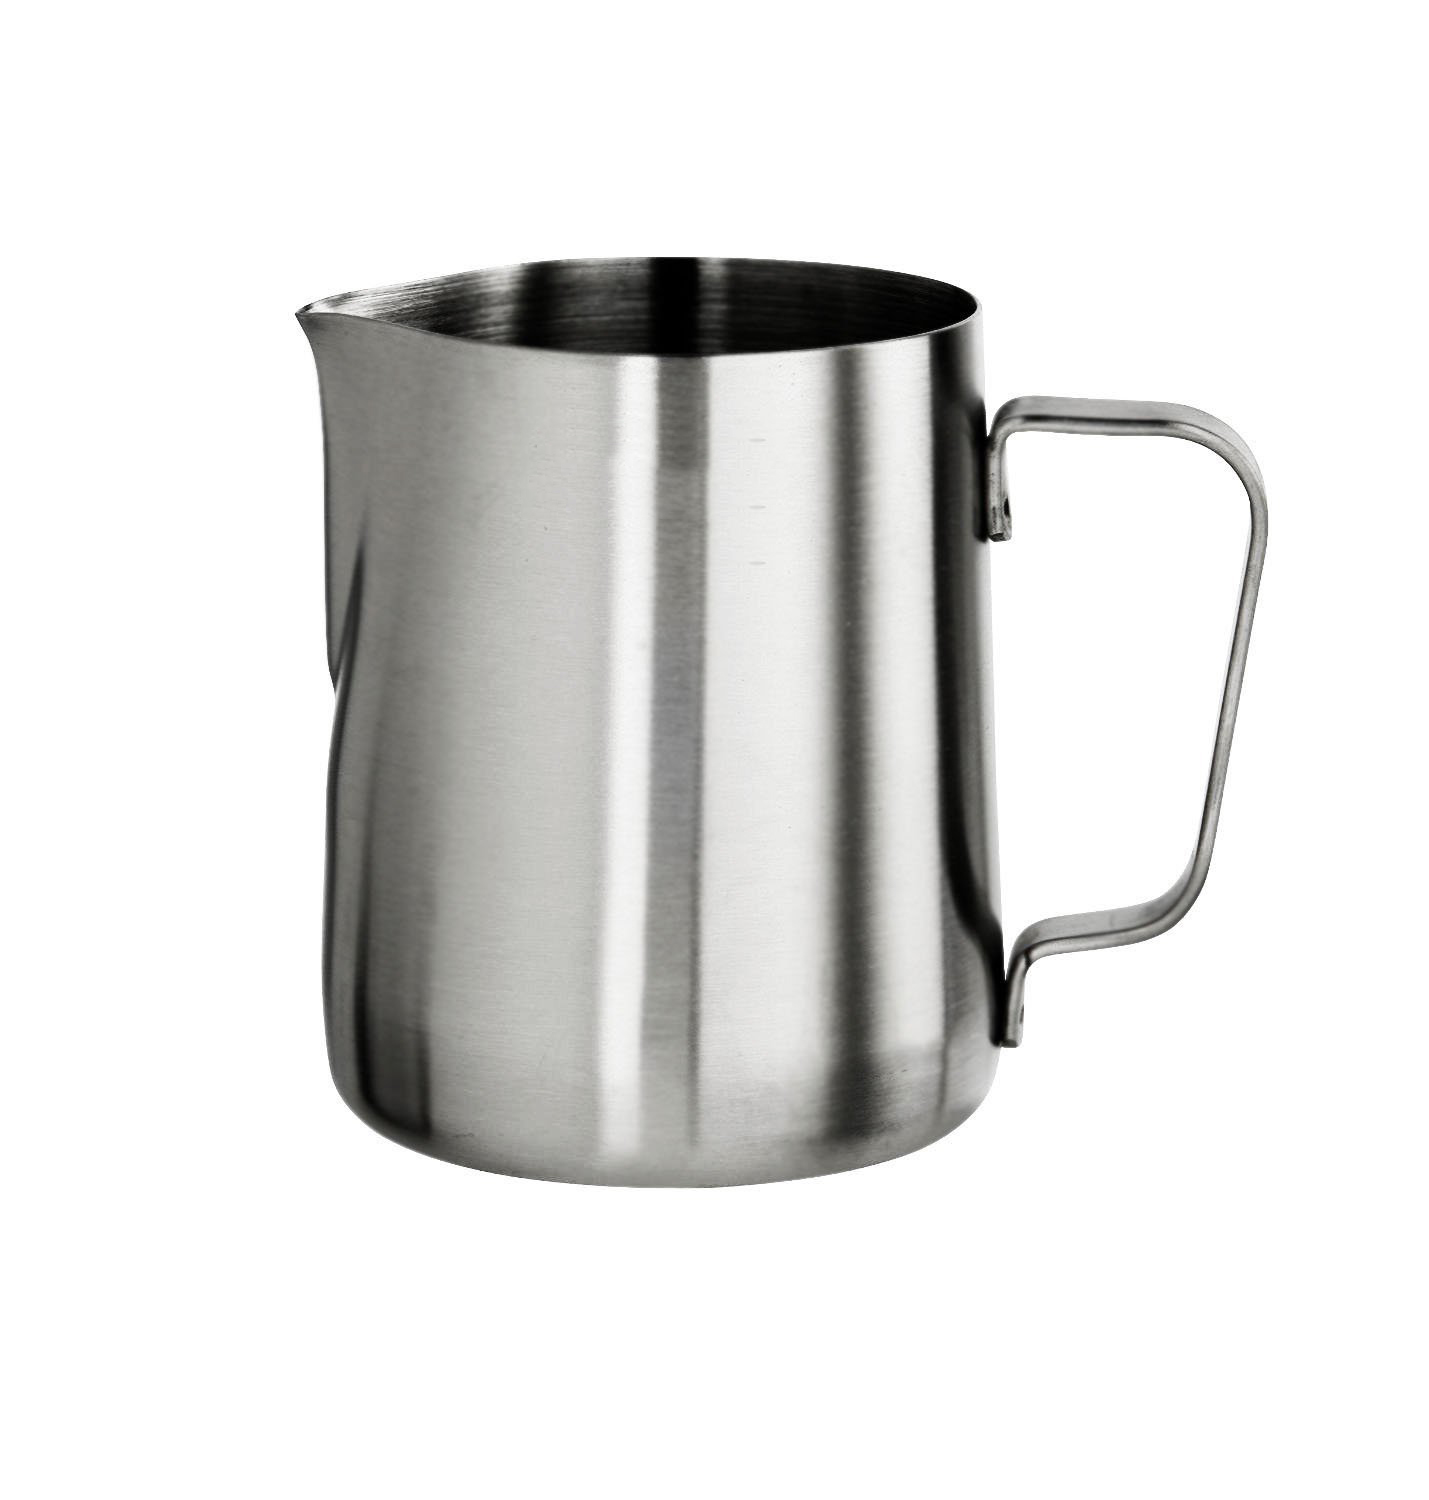 VKING Stainless Steel 12oz Milk Frothing Pitcher for Espresso Machine Coffee Milk Frother and Latte Maker